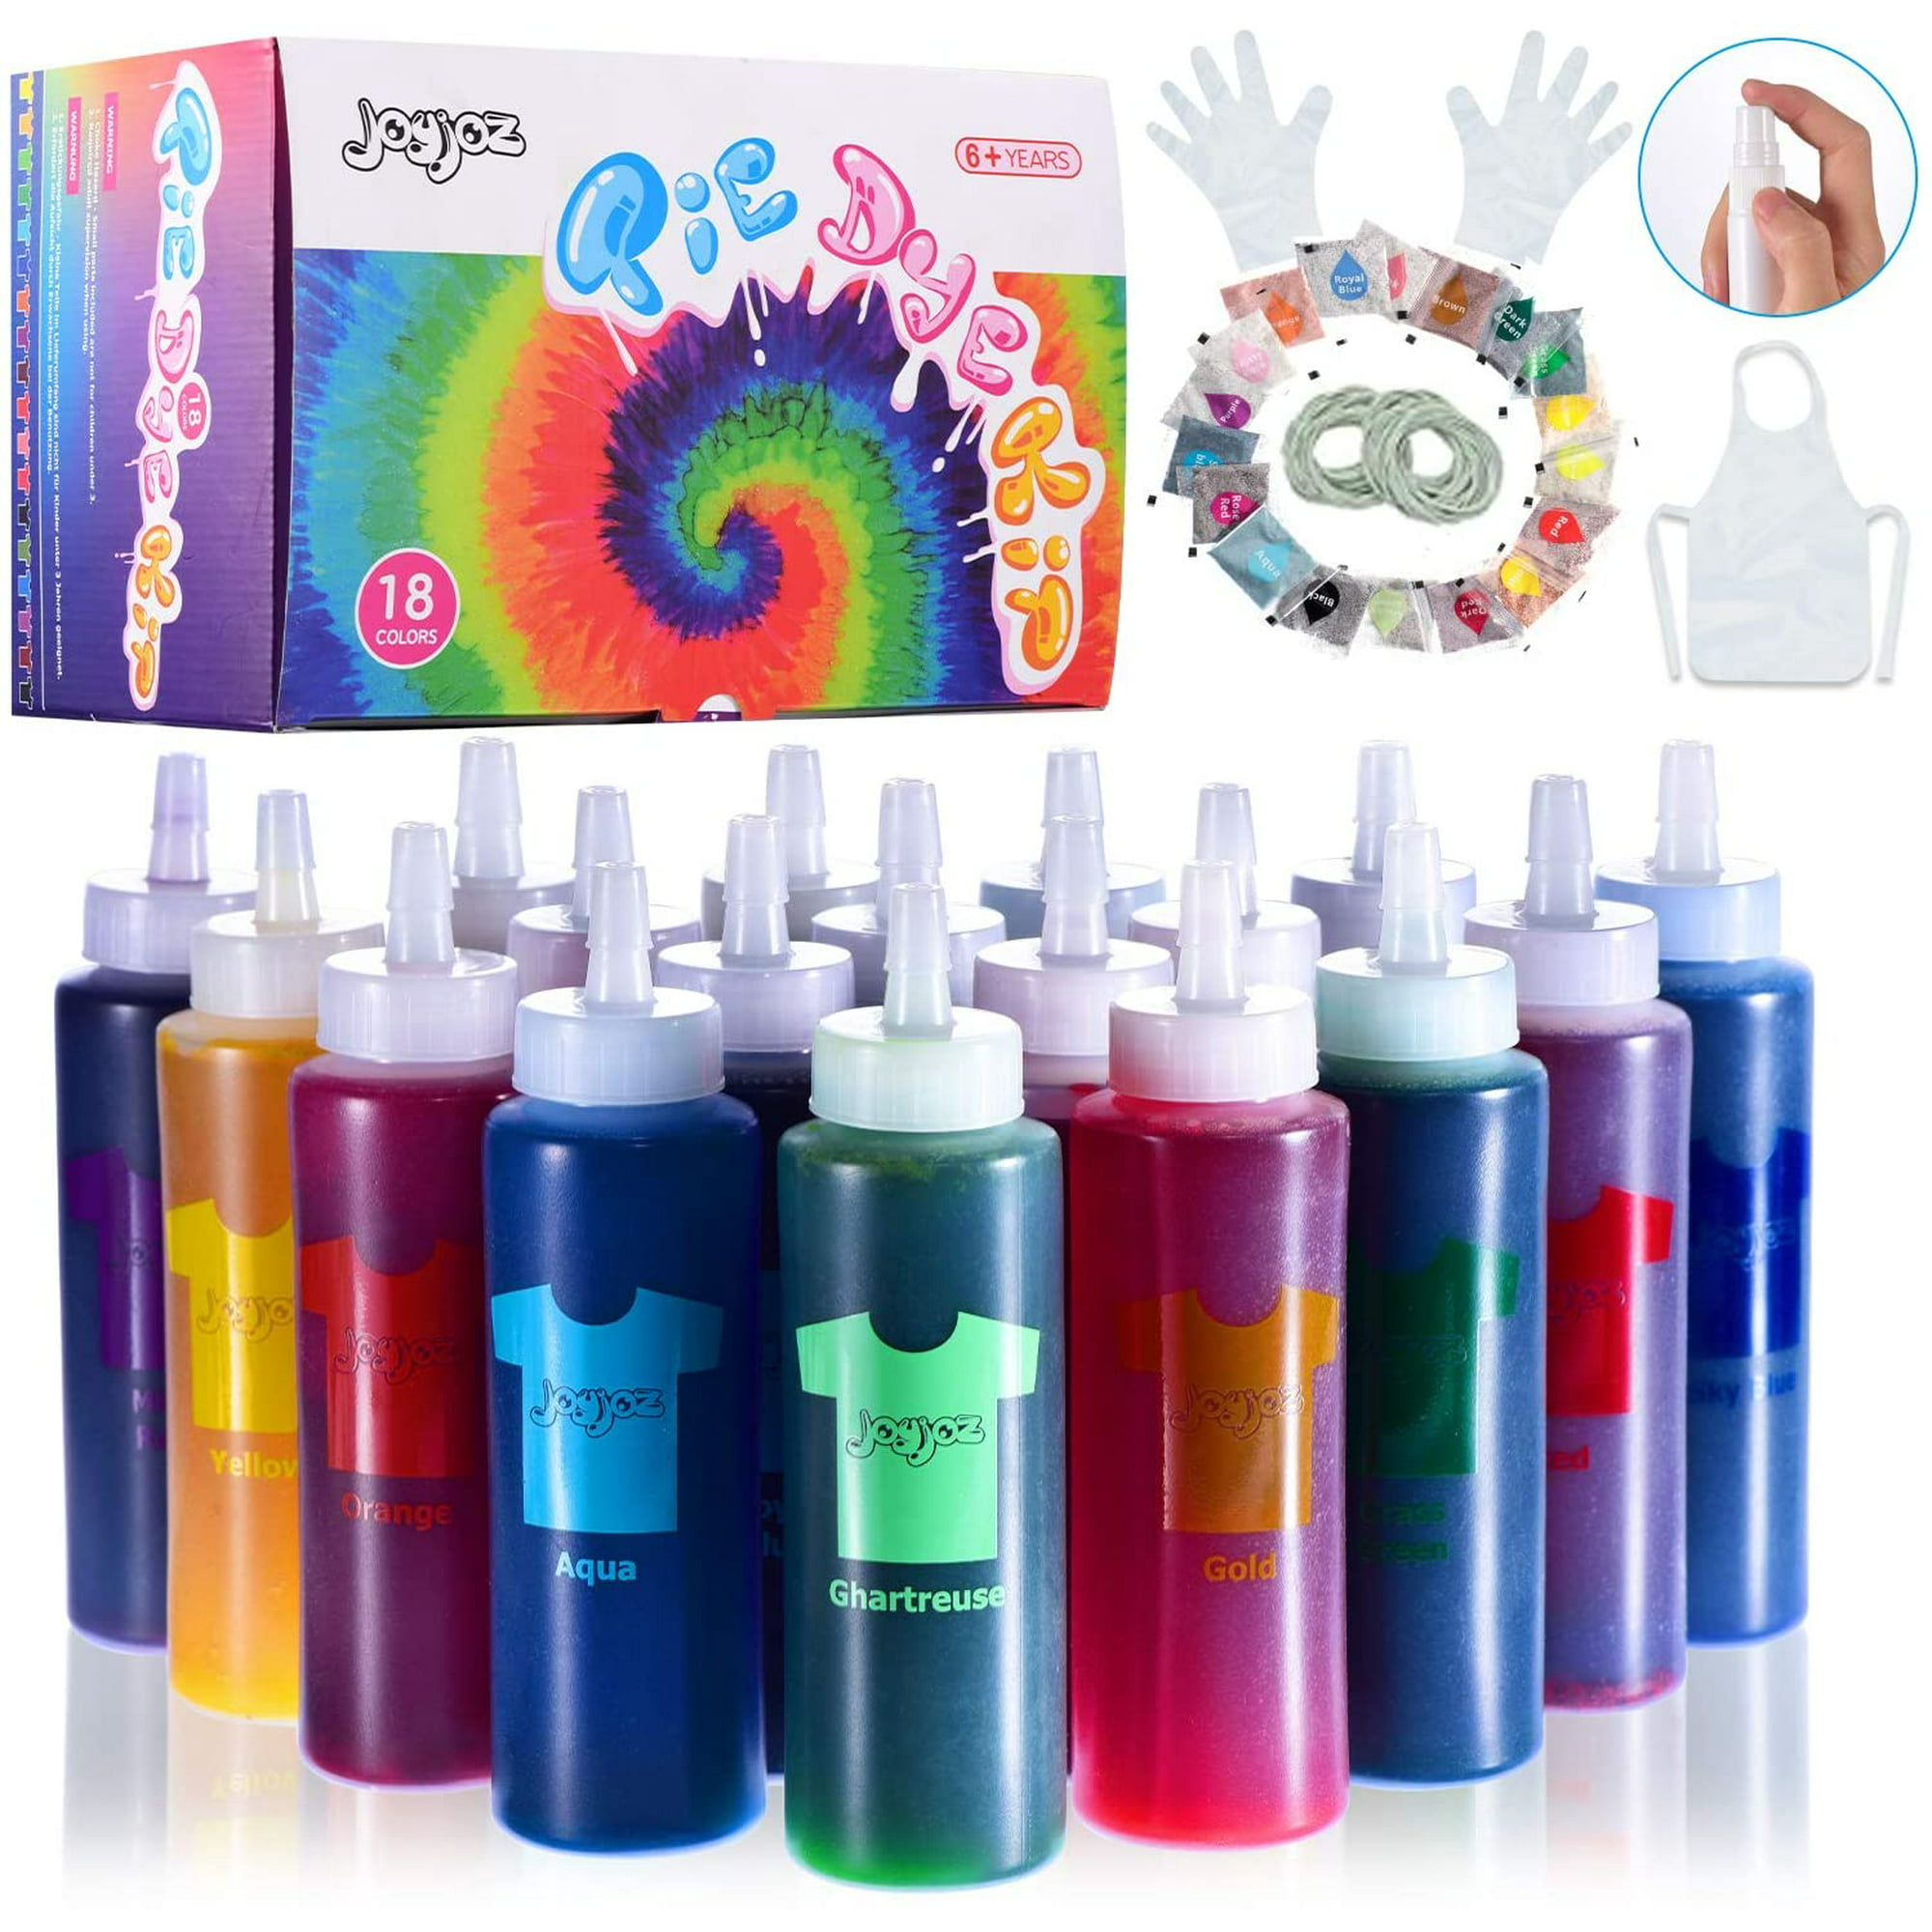 Tie Dye Kit 36 Bags Pigment 18 Colors Kits For S And Kids Fabric With Rubber Bands Gloves A Diy Art Craft Clothing T Shirts Shoes Party